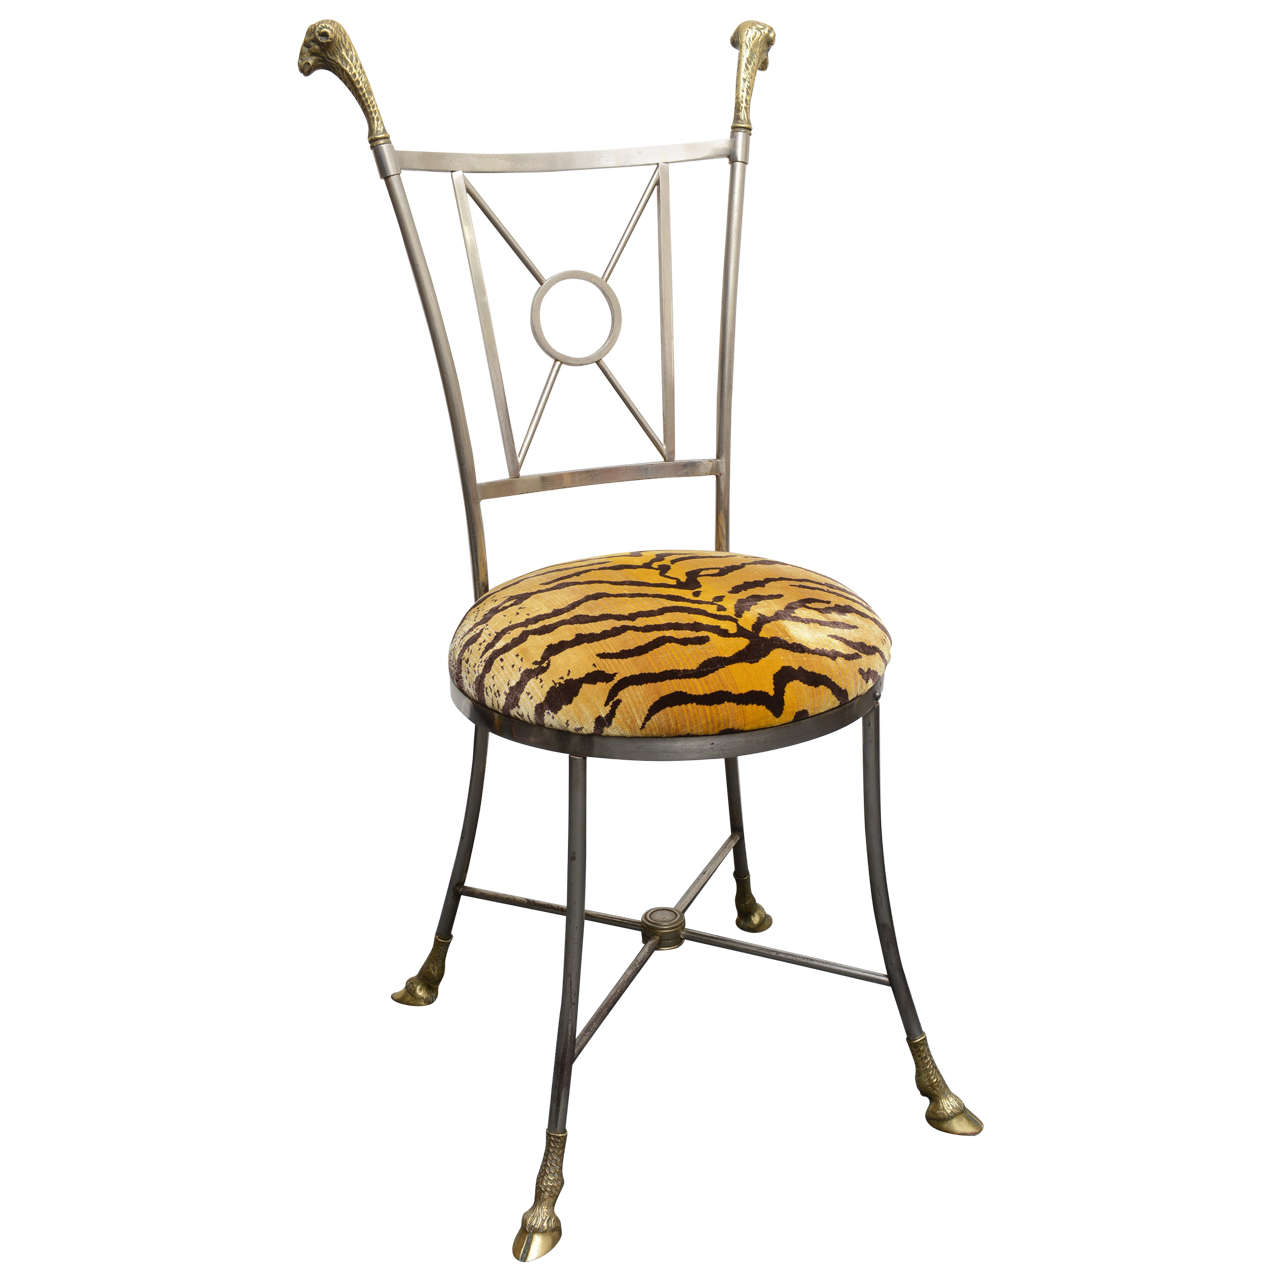 Jansen Style Steal and Brass Chair with Ram's Mask and Hoofed Feet